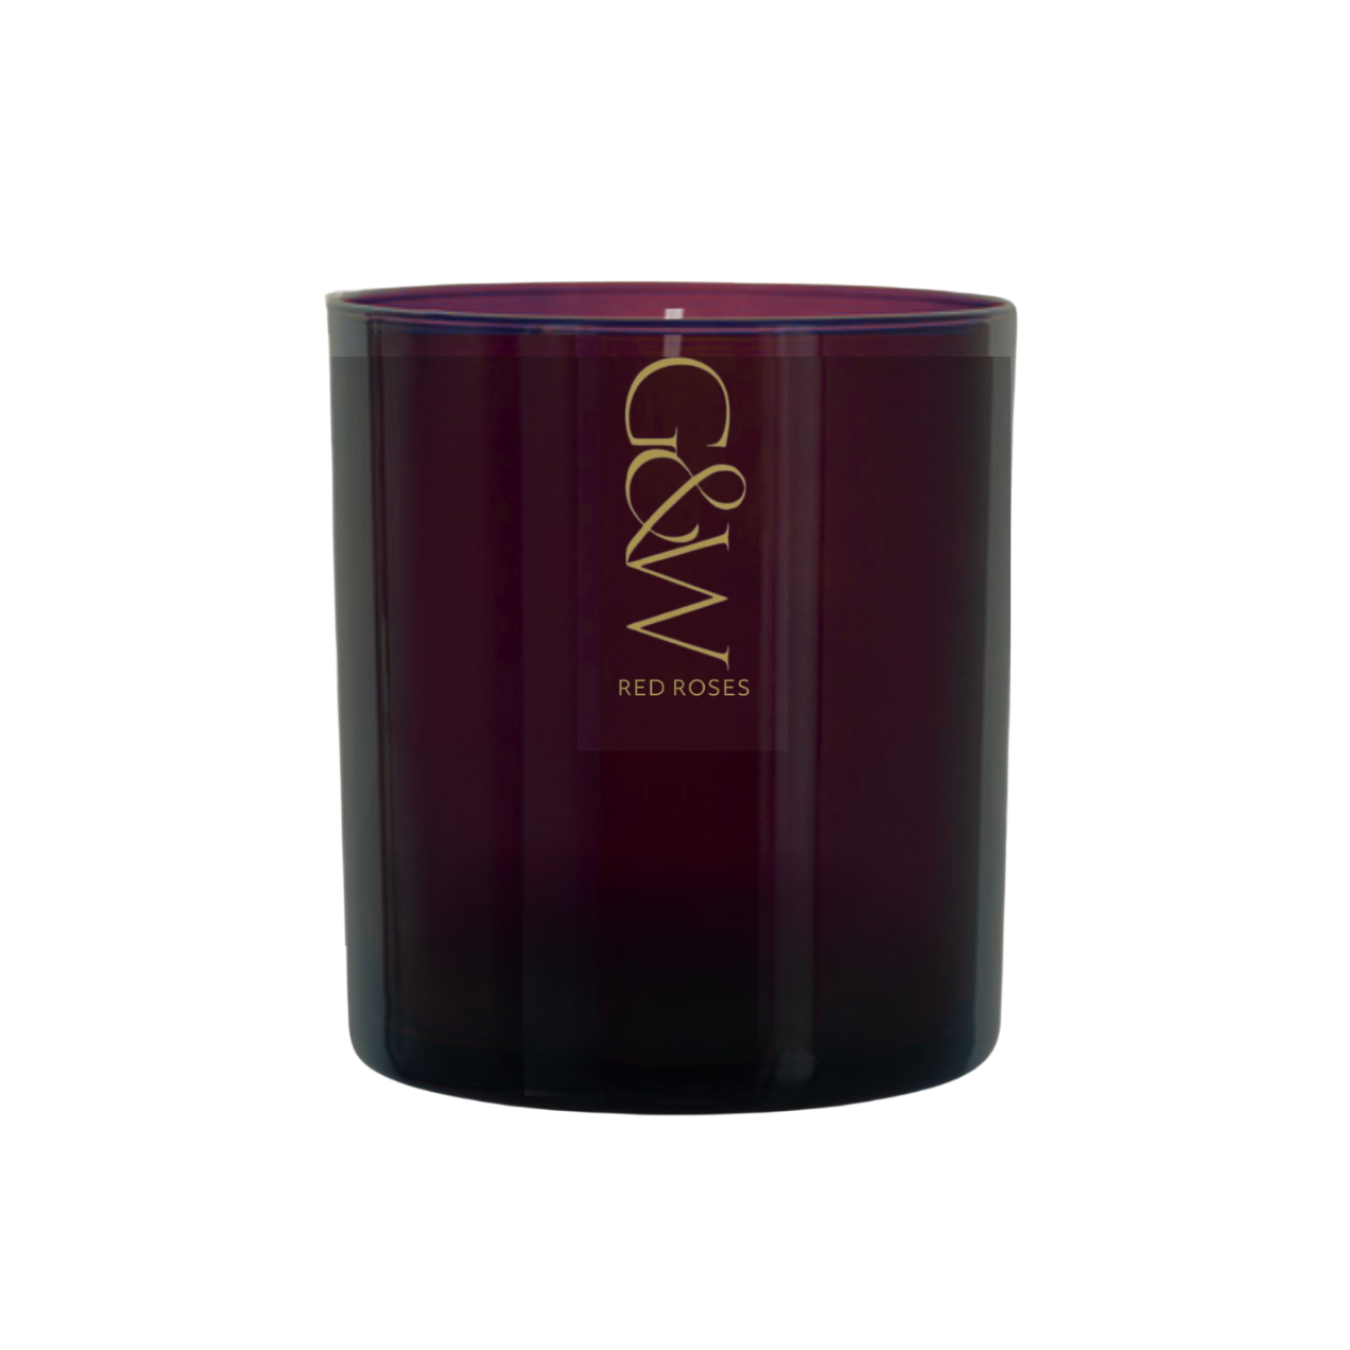 Red Roses Limited Edition Candle